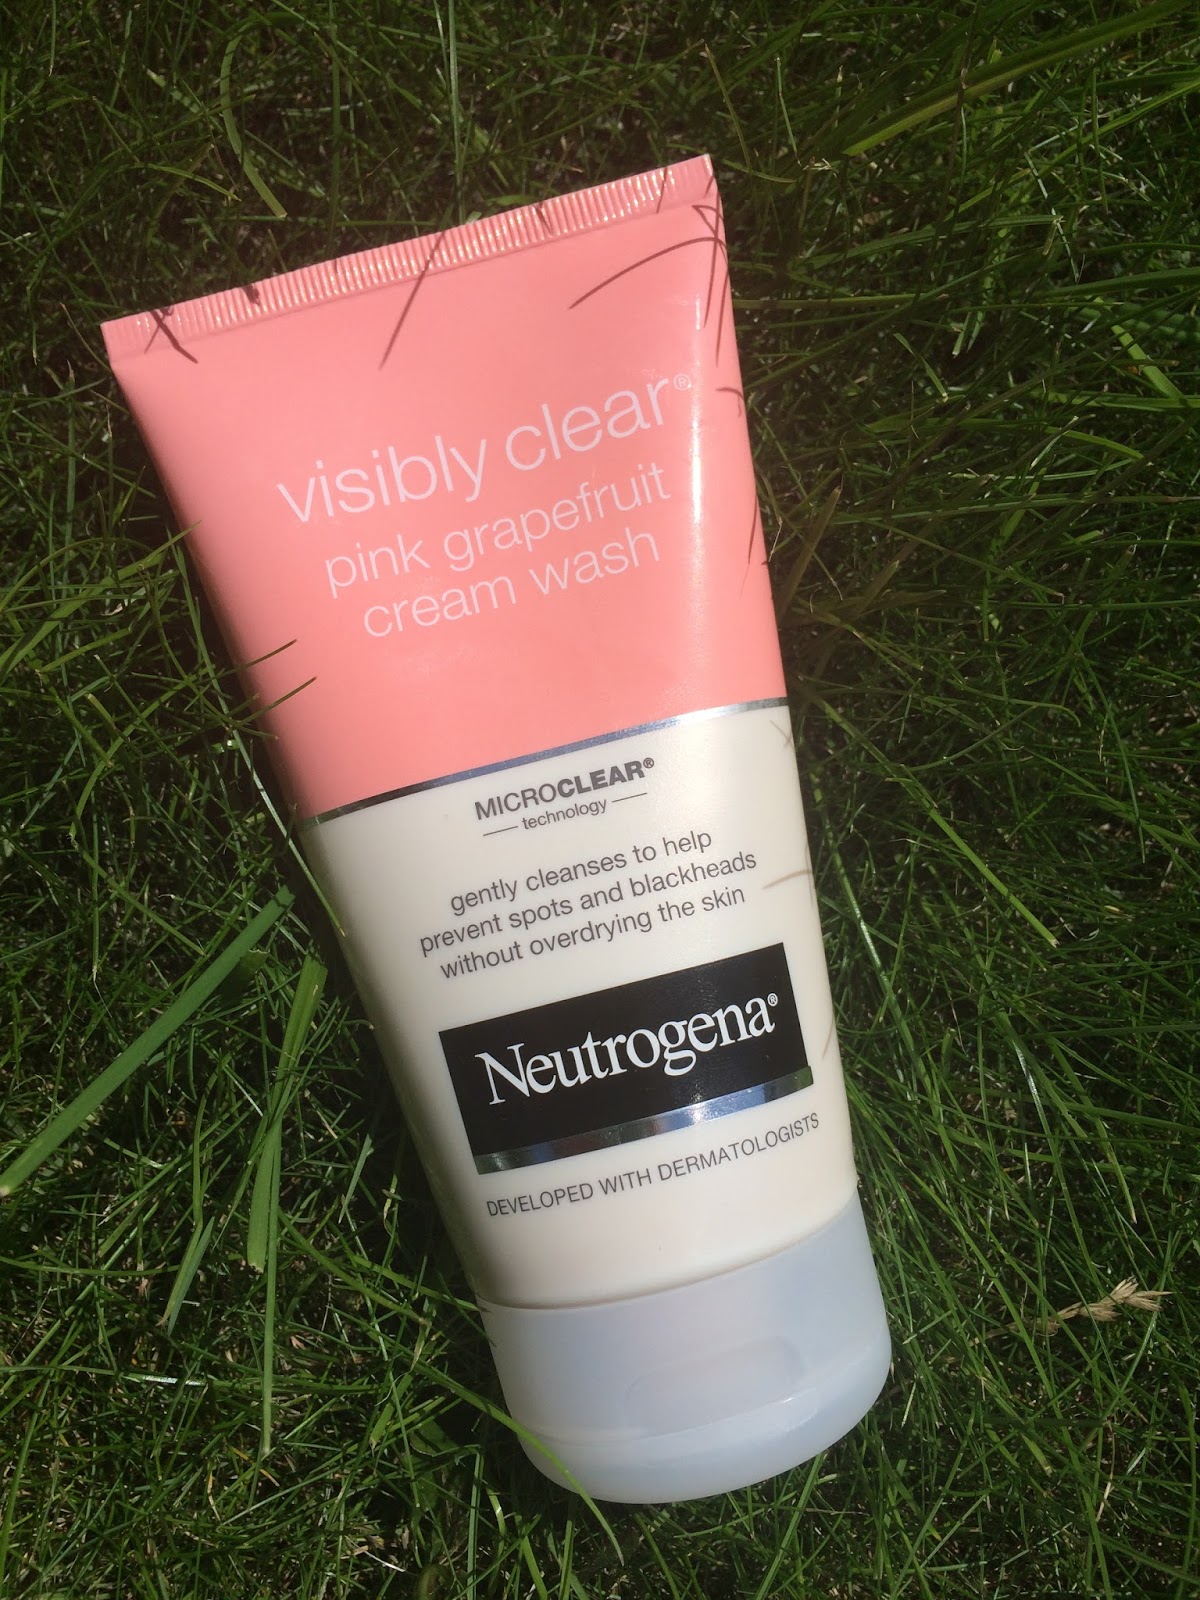 The Glamourelle Neutrogena Visibly Clear Pink Grapefruit Cream Wash Review